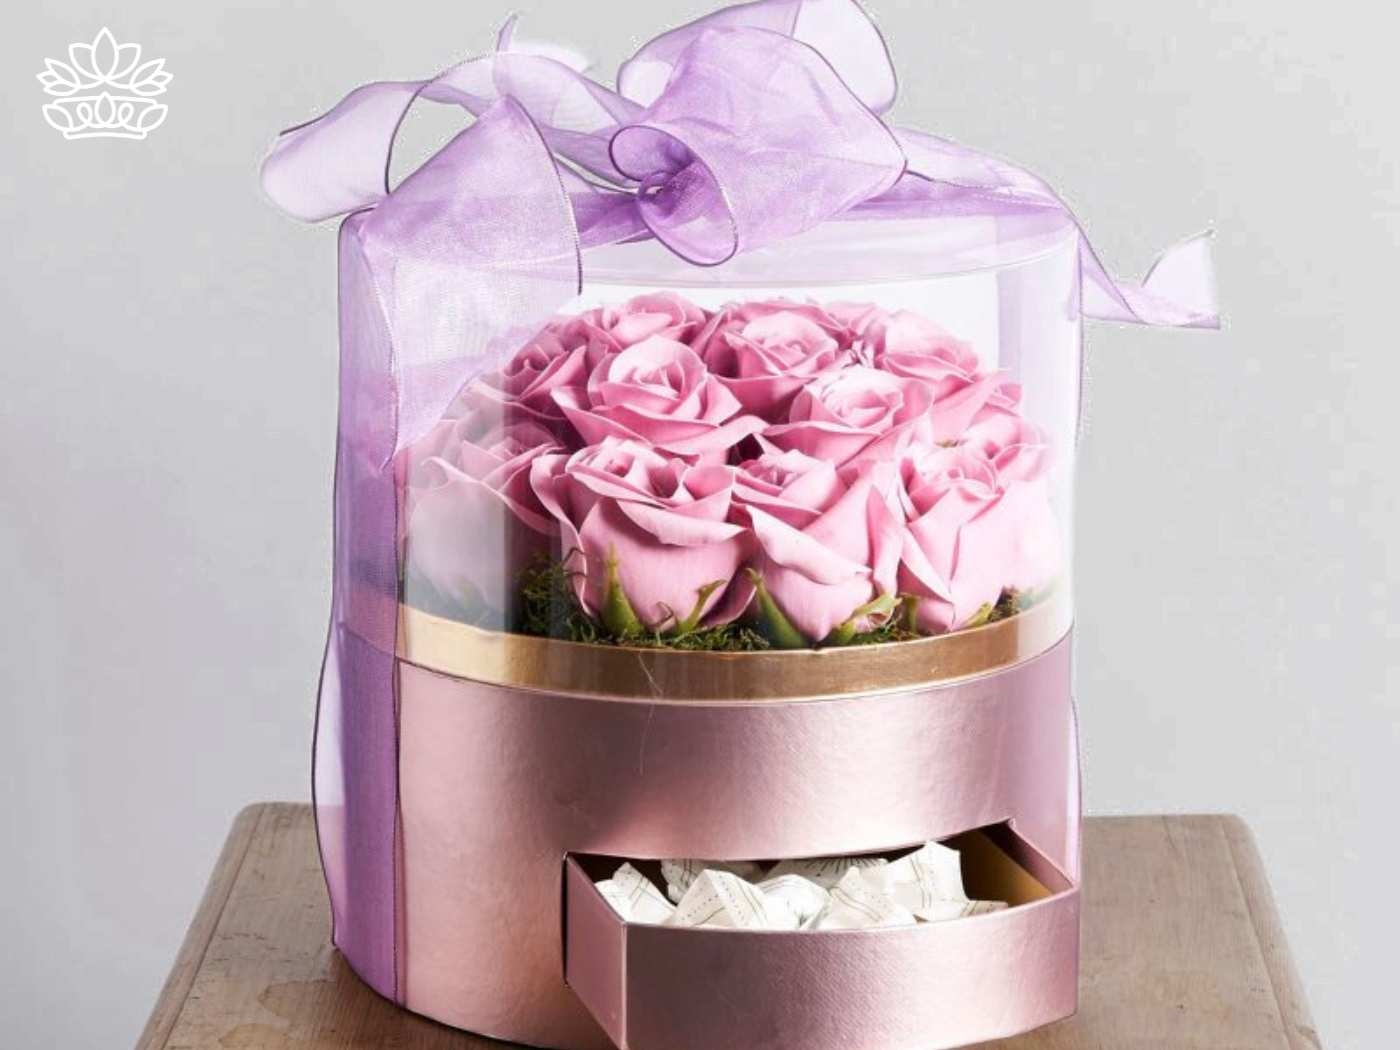 A luxurious gift box filled with elegant pink roses and topped with a sheer lavender ribbon, containing a small drawer of chocolates for a thoughtful, personalized touch. Fabulous Flowers and Gifts. Gifts for Her.